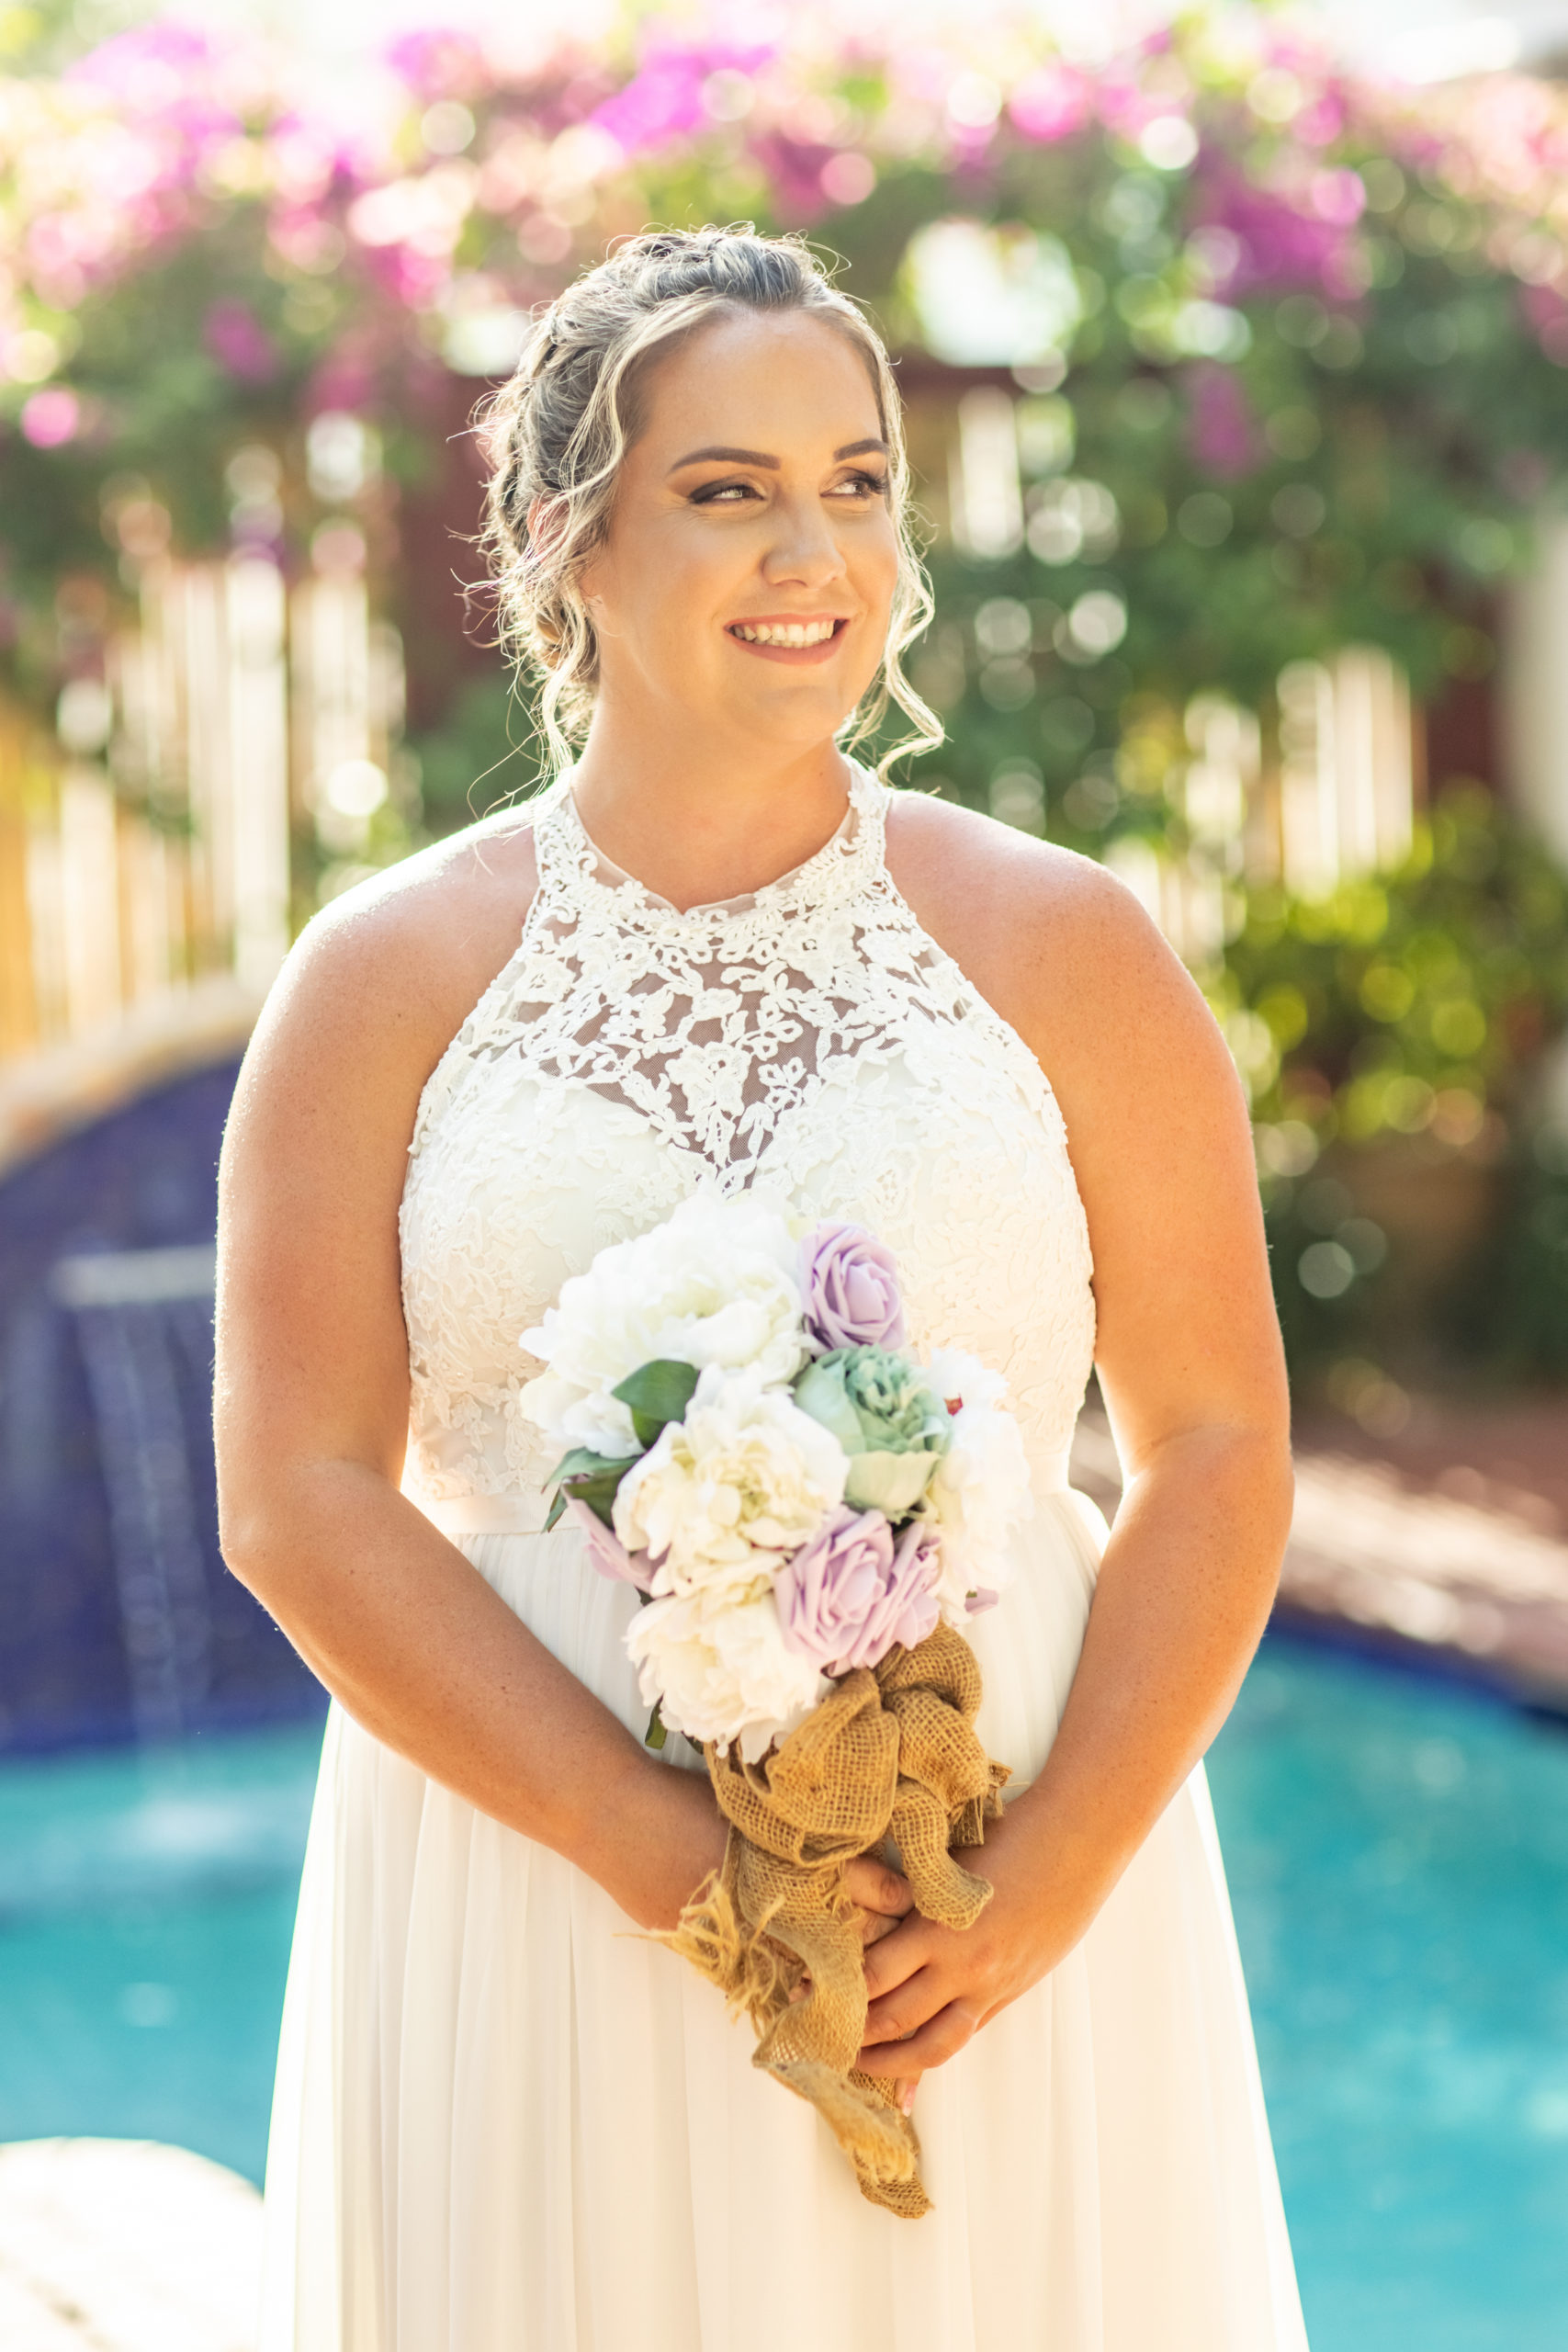 Beautiful bride standing in front of a pool and wall of flowers looking to the right 